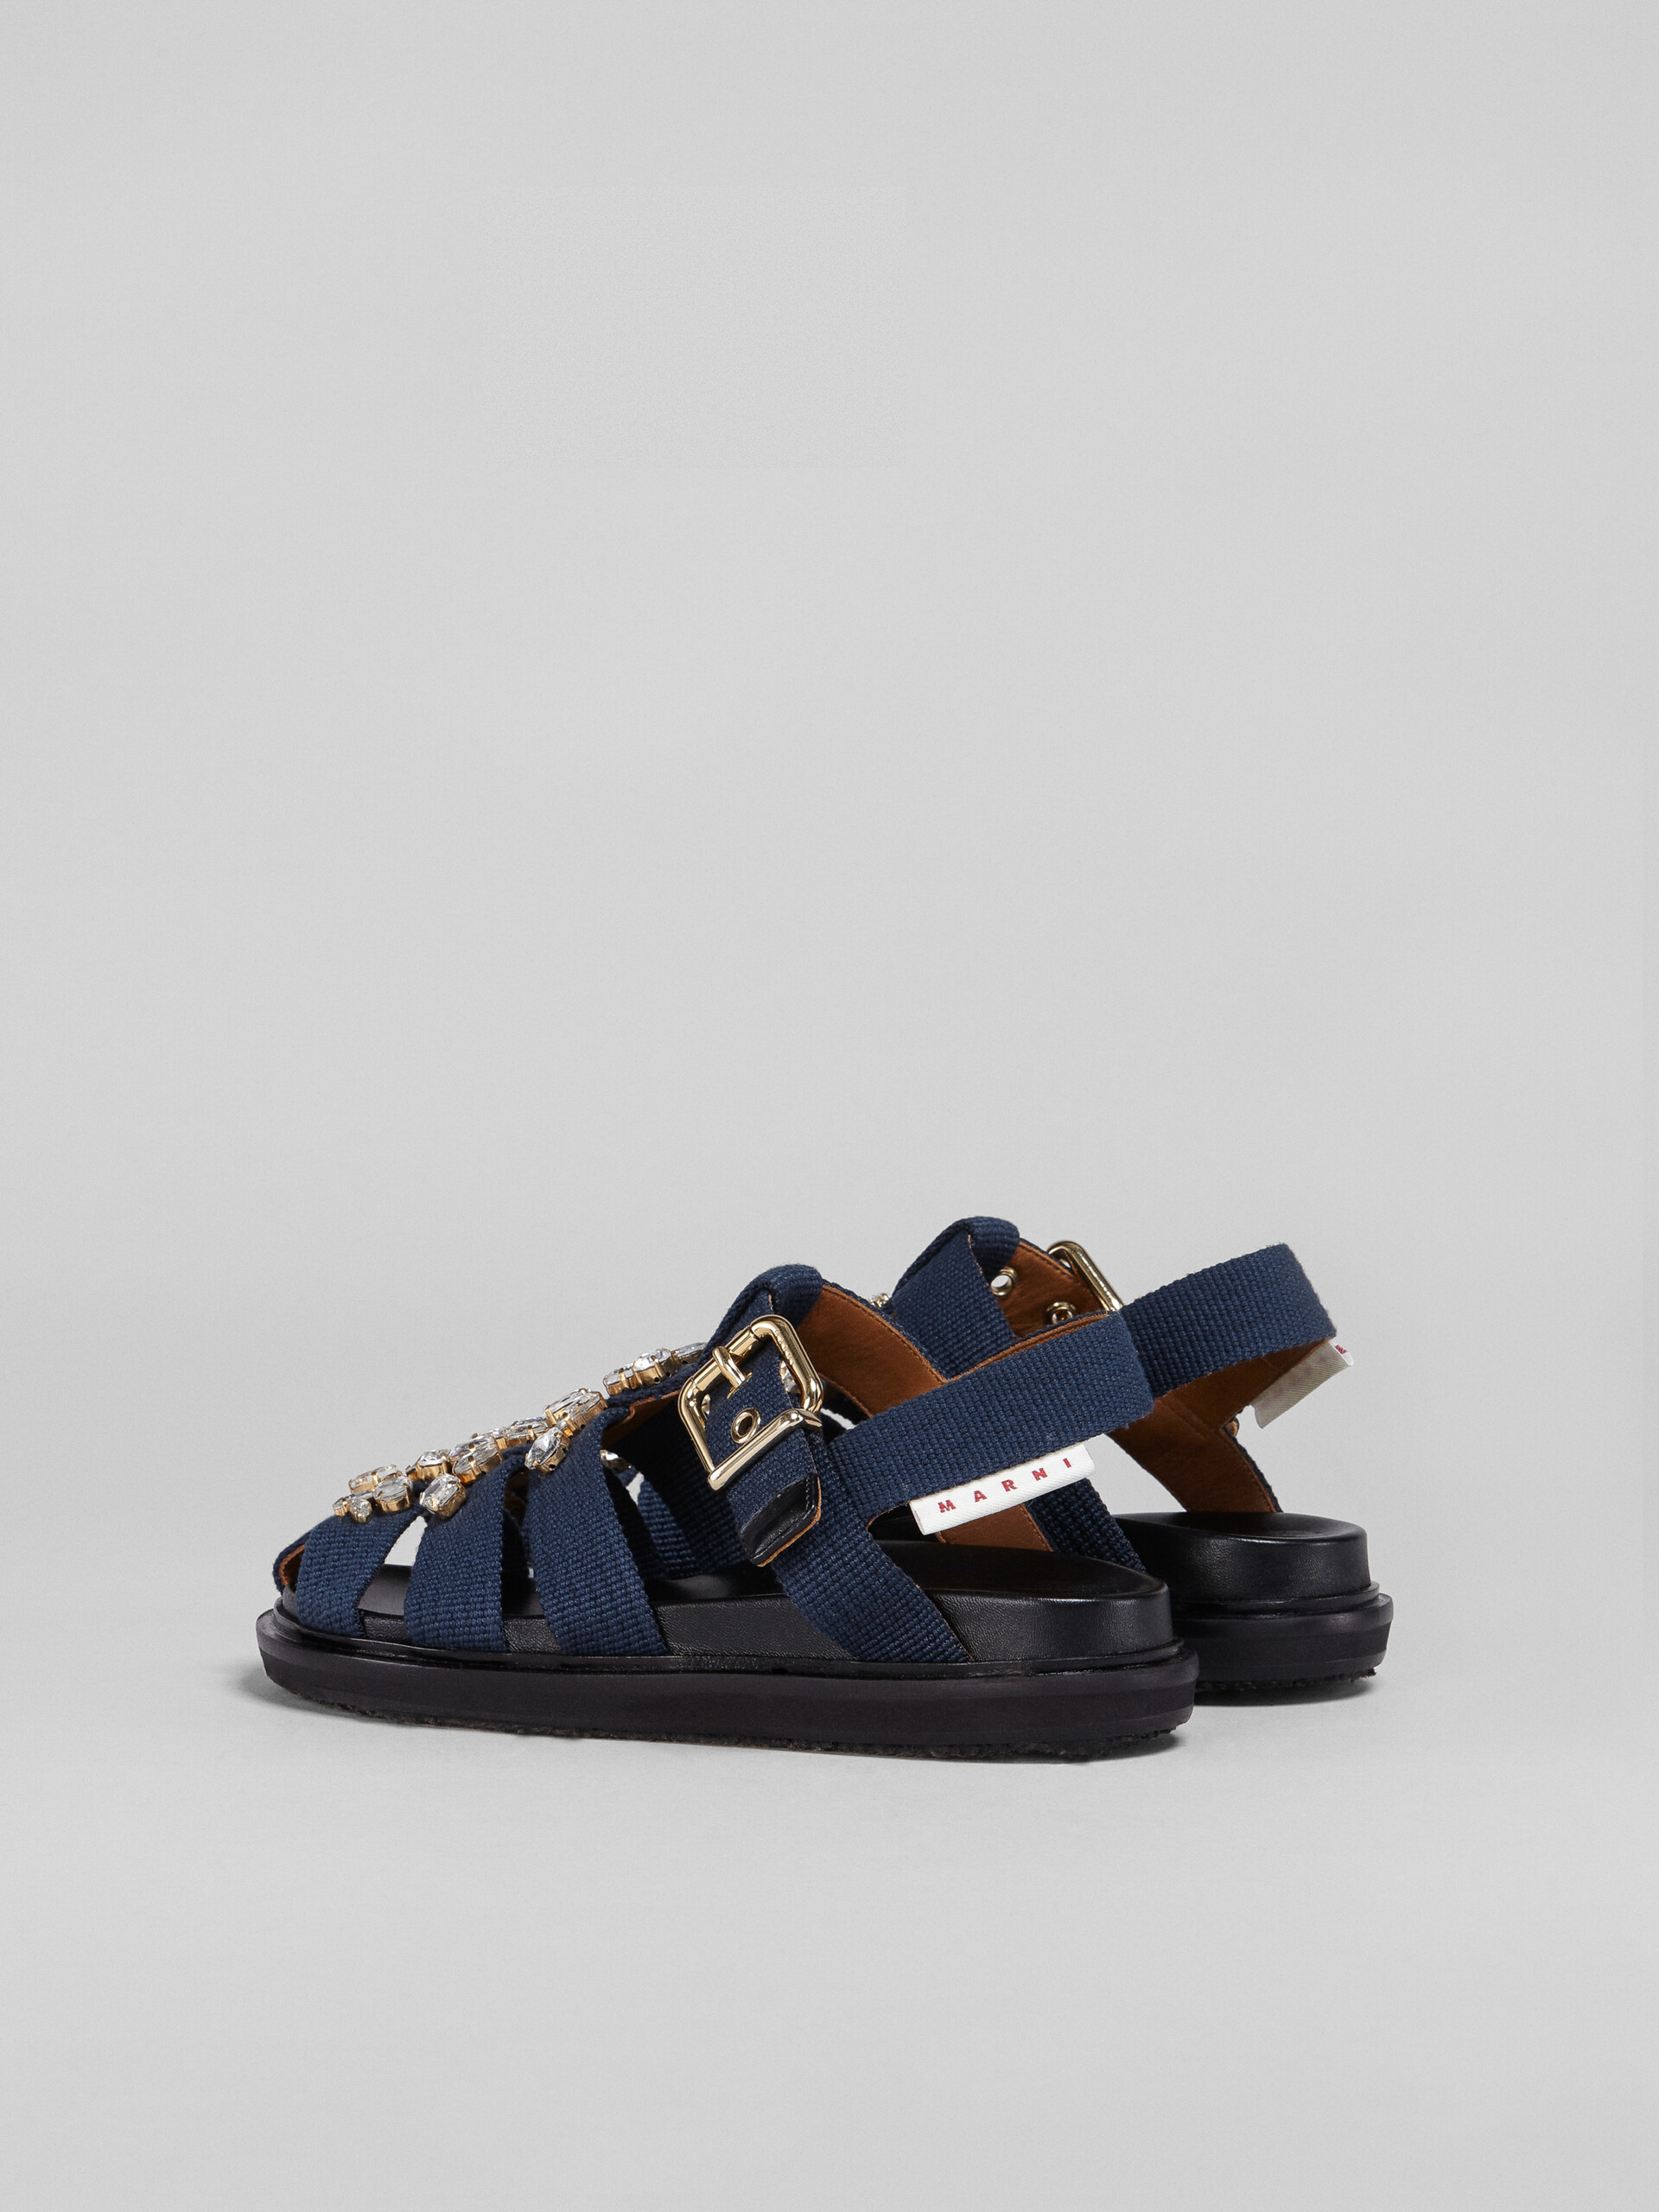 Blue ribbon Fussbett sandal with glass beads - Sandals - Image 3